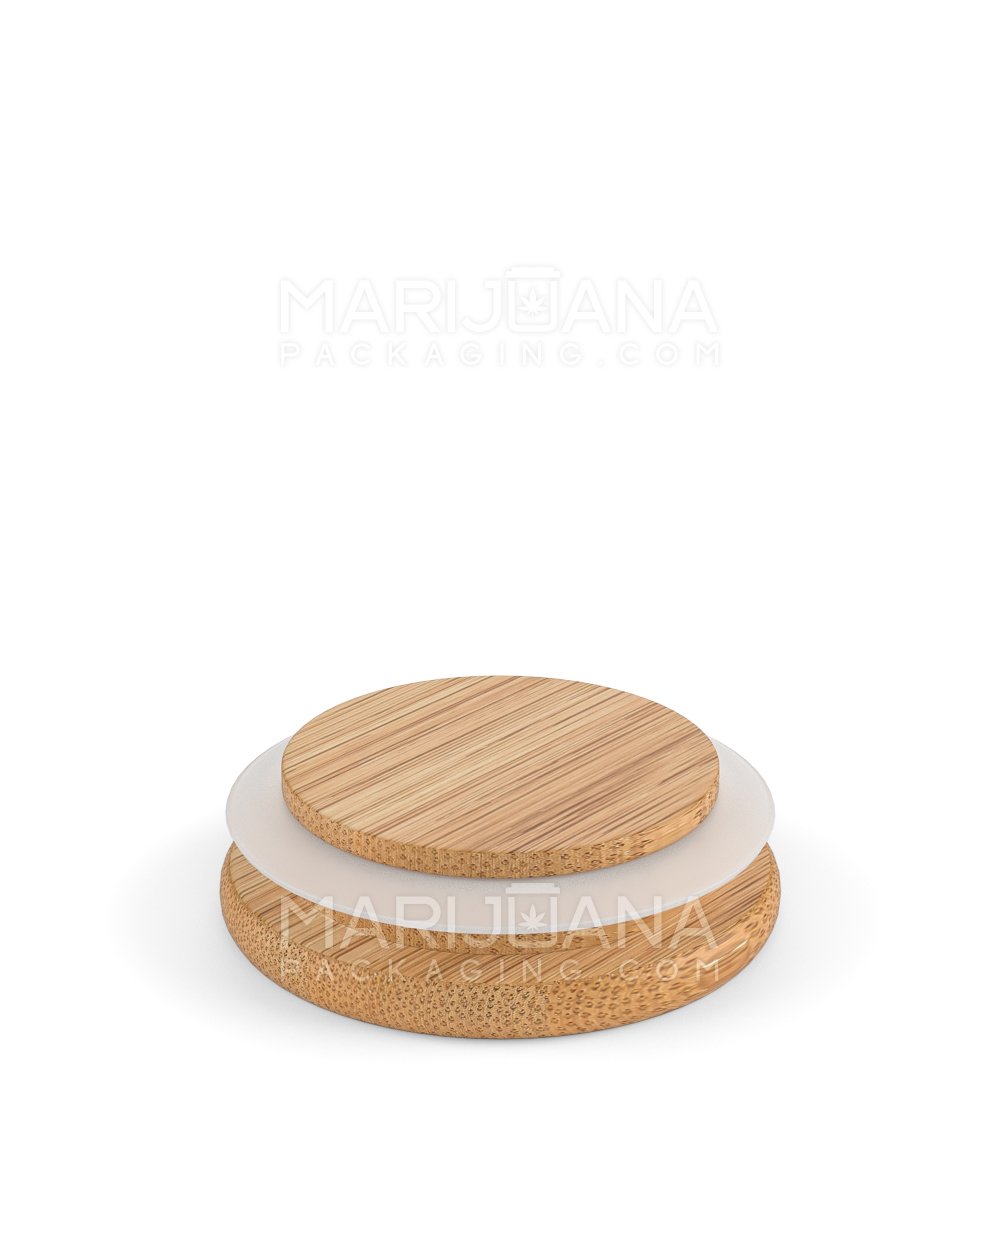 Glass Jar with Wooden Lid | 10oz - 80 Dram - 80 Count - 11